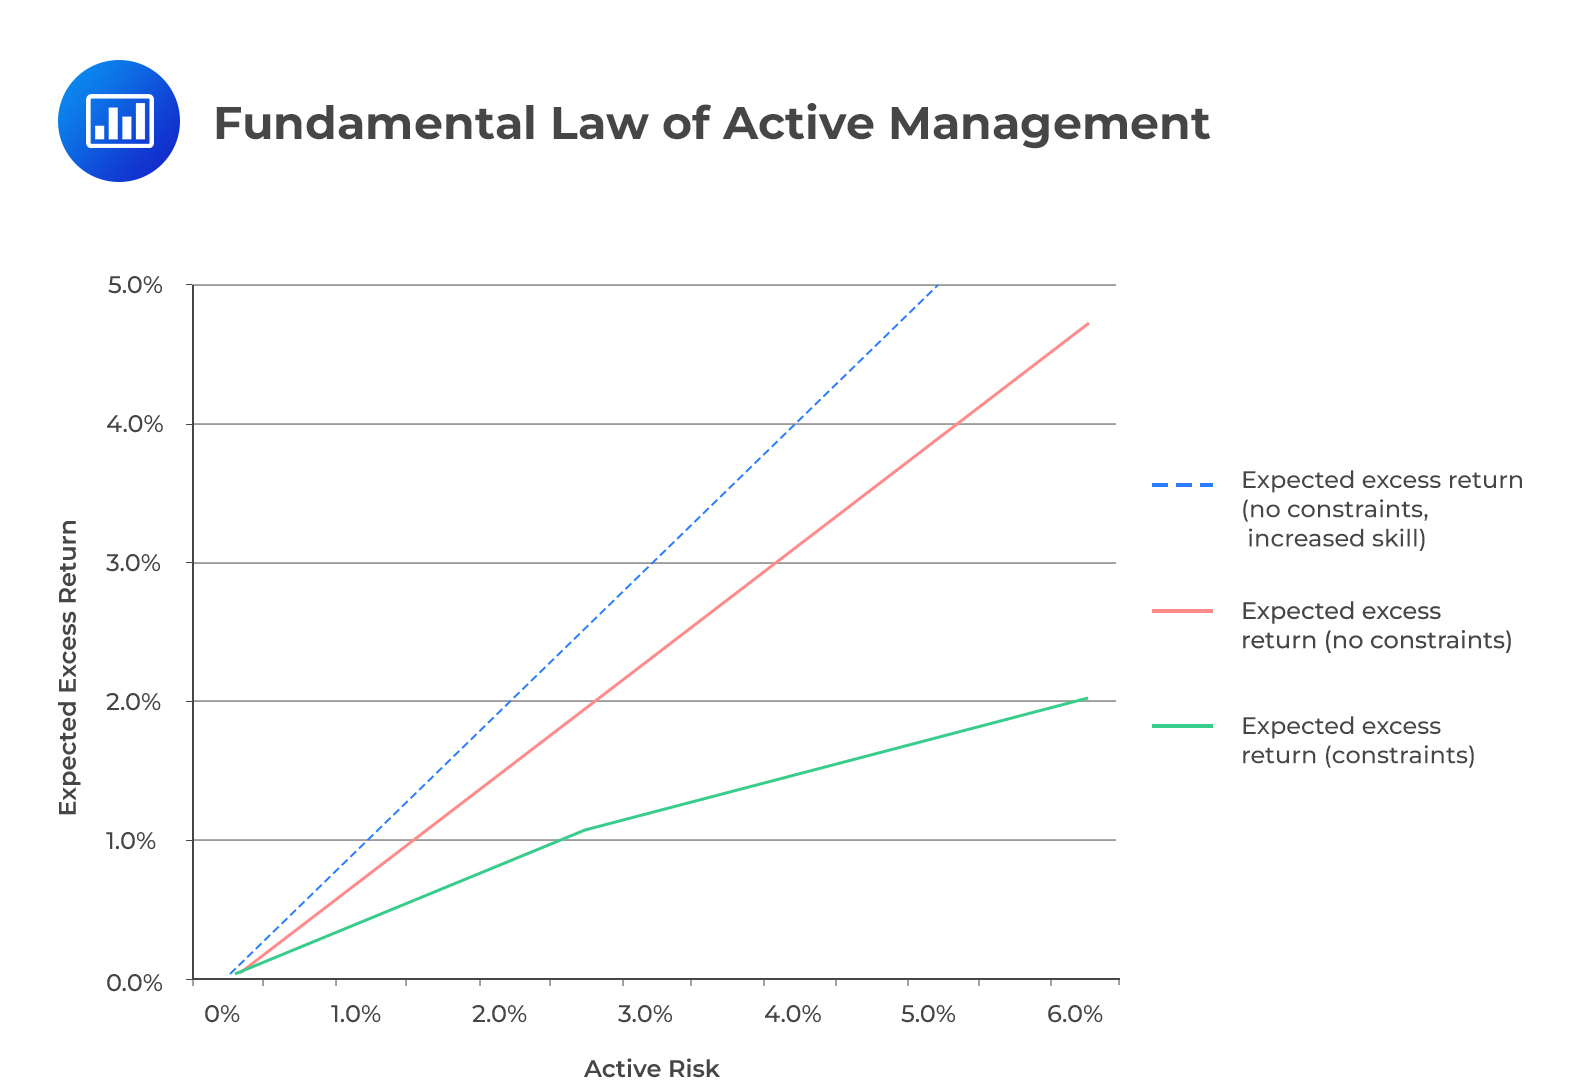 Fundamental Law of Active Management